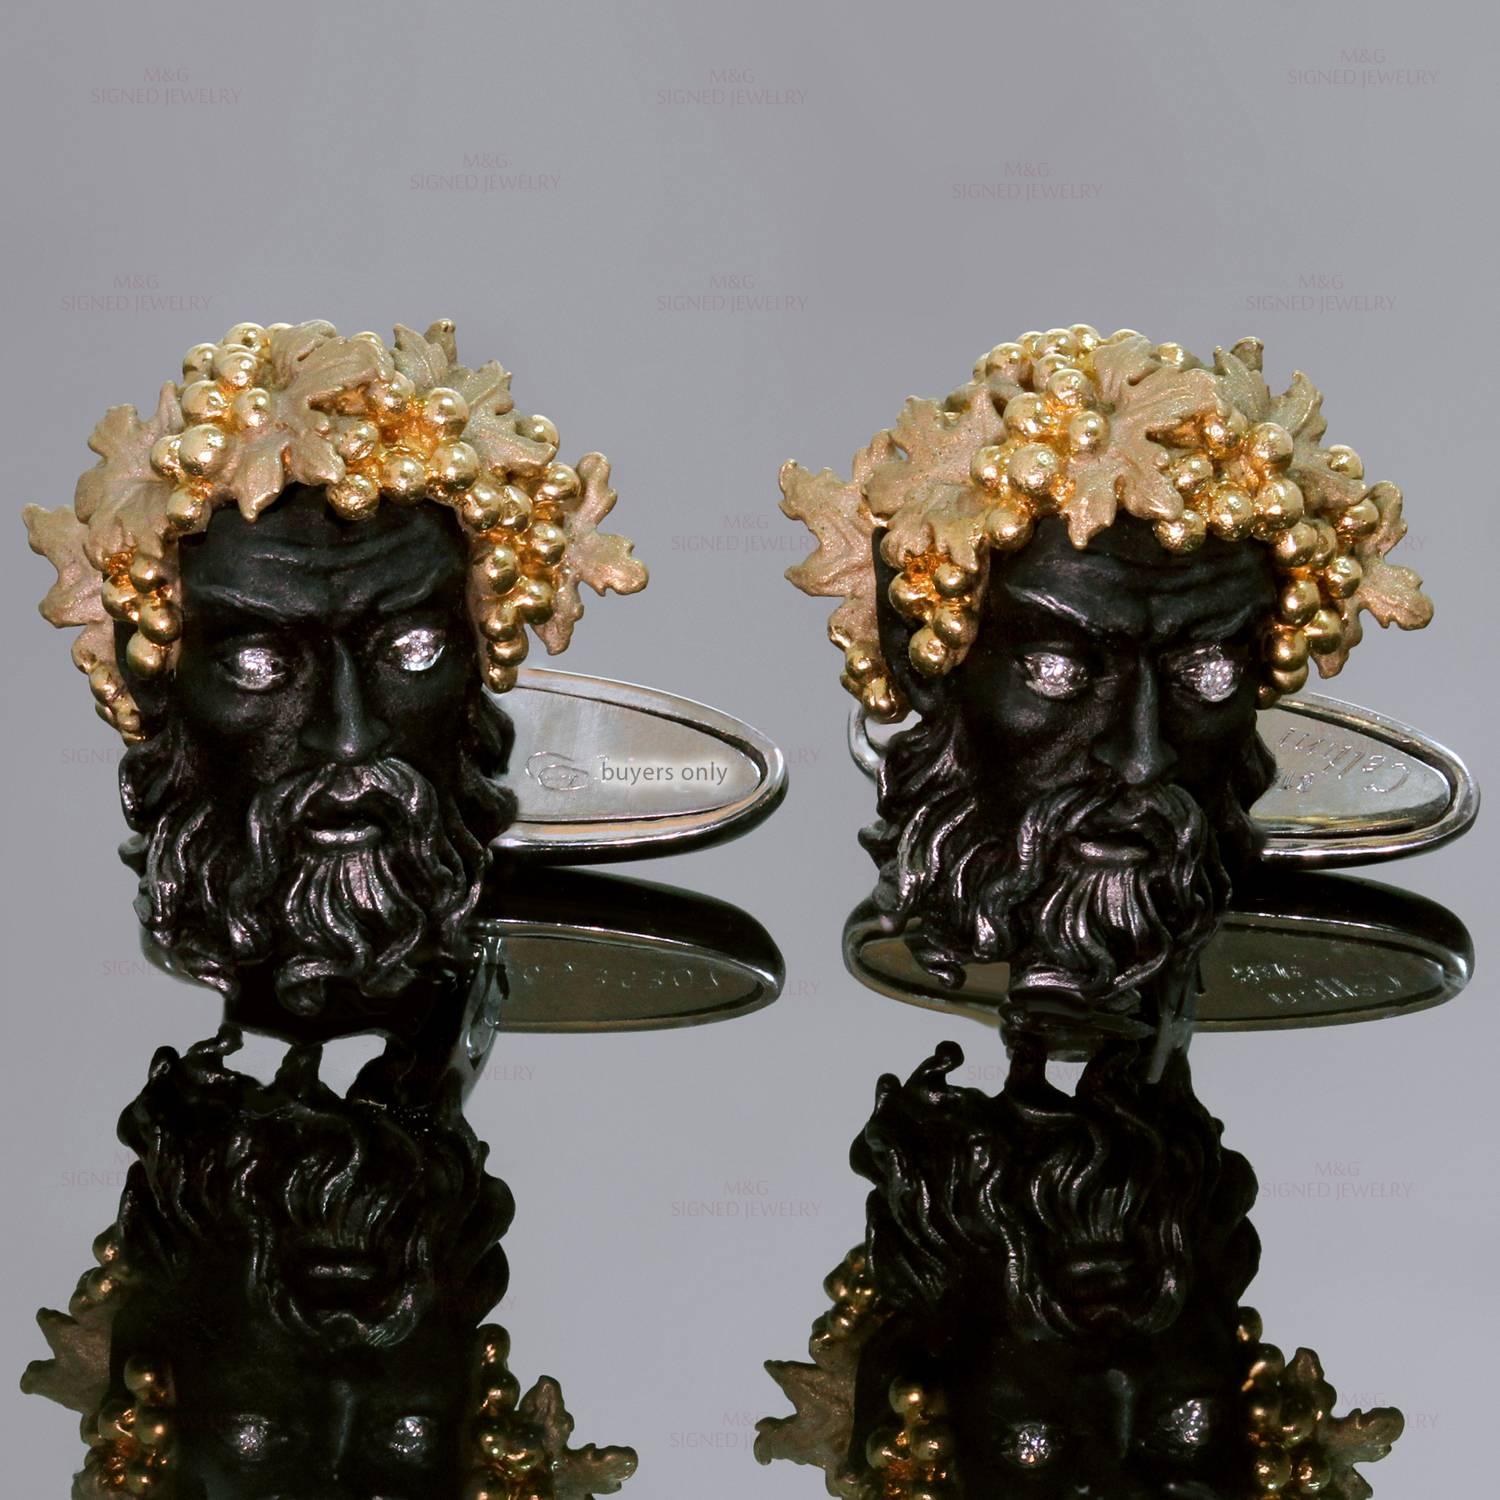 These rare and unique Carrera y Carrera cufflinks are inspired by the stunning Bacchus, the ancient Roman god of wine and fertility and hand-crafted out of yellow and blackened and blackened 18k gold with sculpted details and brilliant-cut round